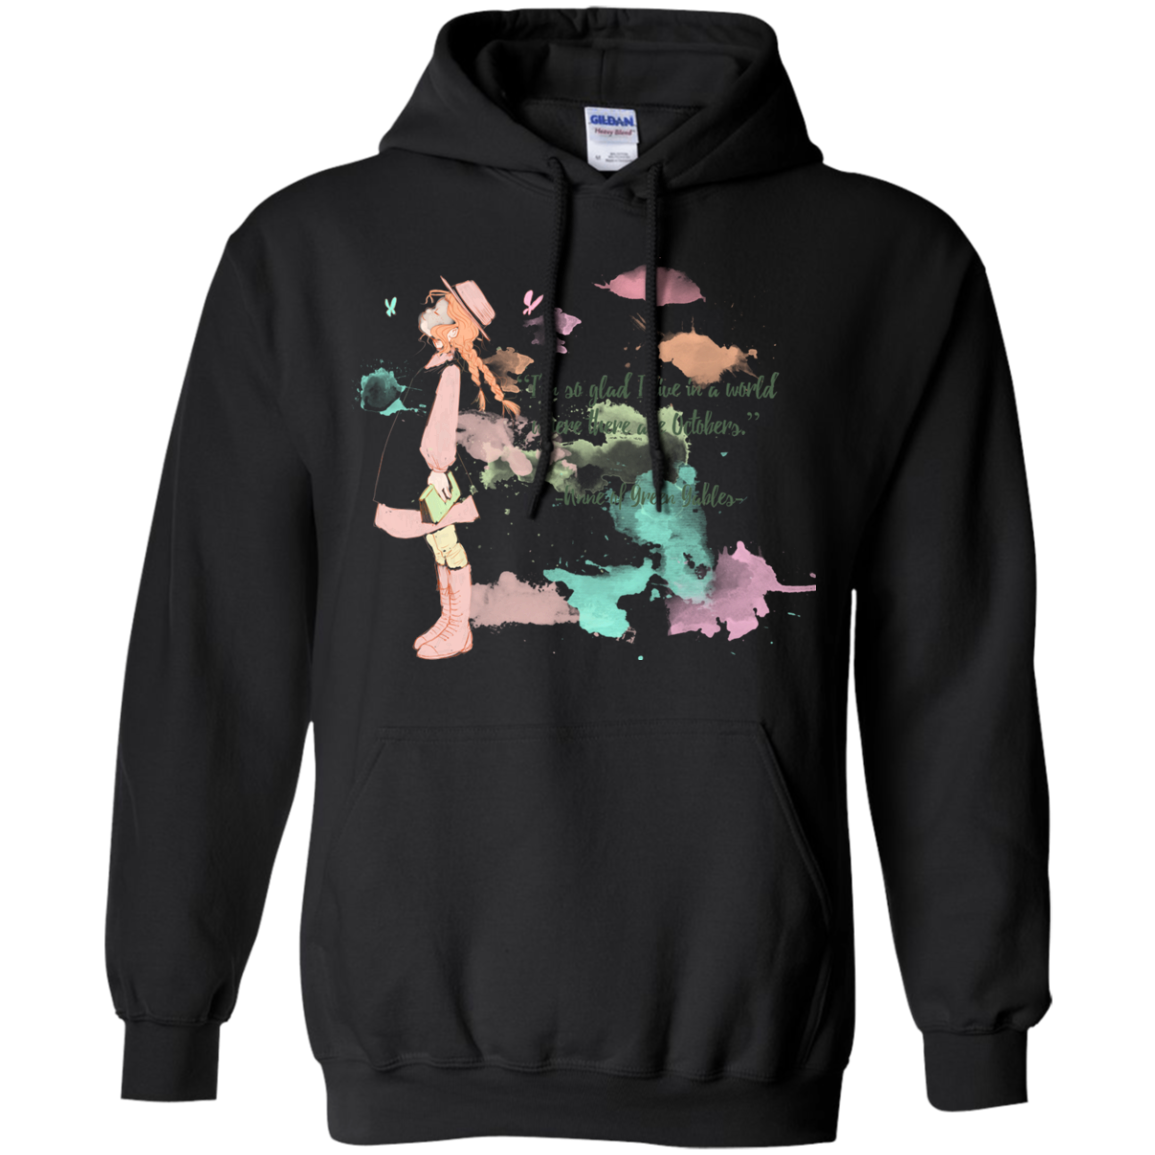 Anne of Green Gables 2 Pullover Hoodie